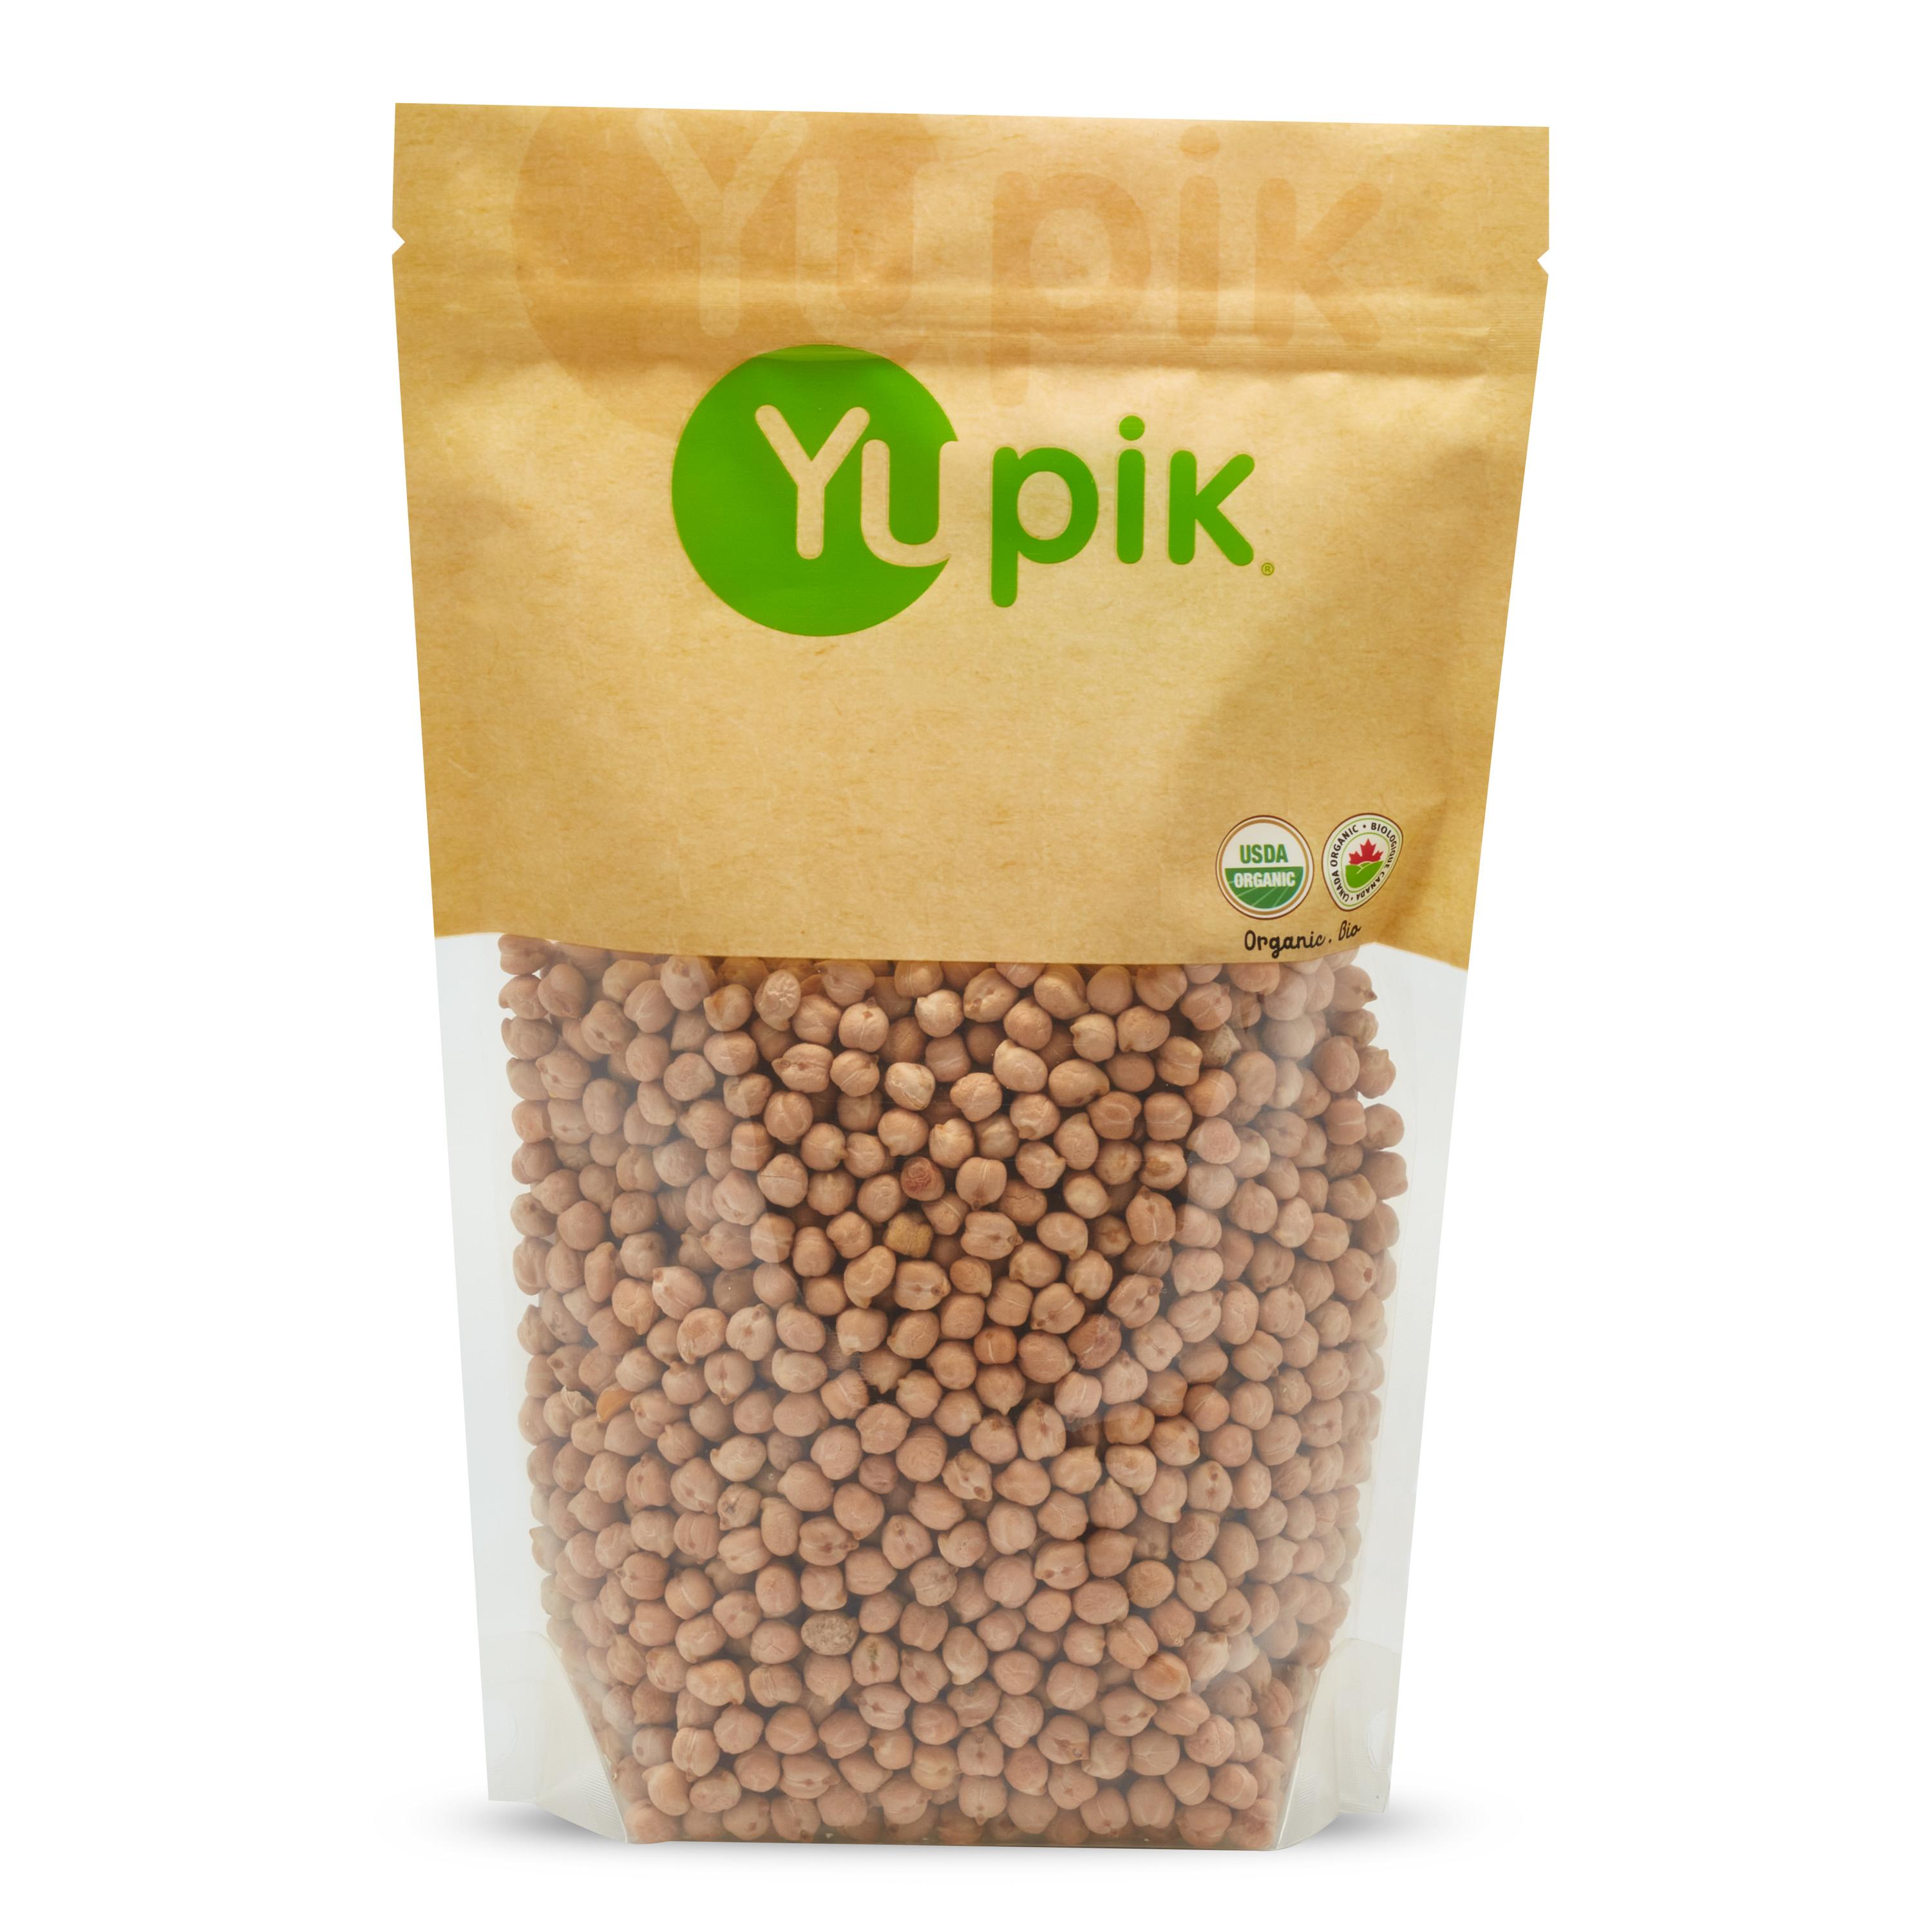 Organic chick peas.It is a raw agriculture product. Although it has been mechanically cleaned before packaging, some foreign material may be present. Sort and wash before using.